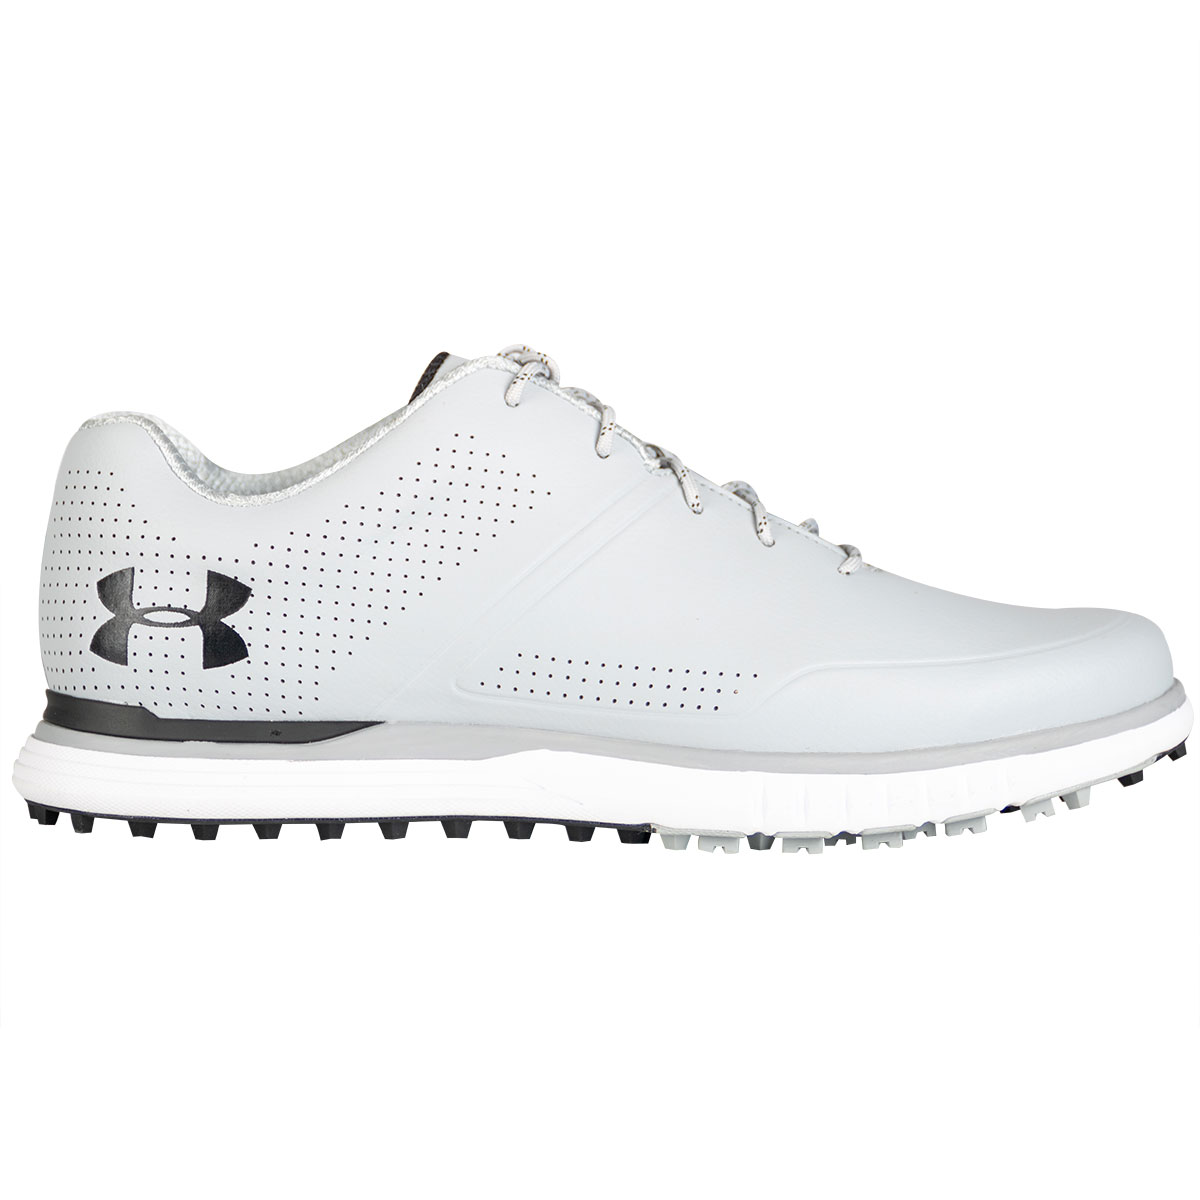 under armour golf shoes grey